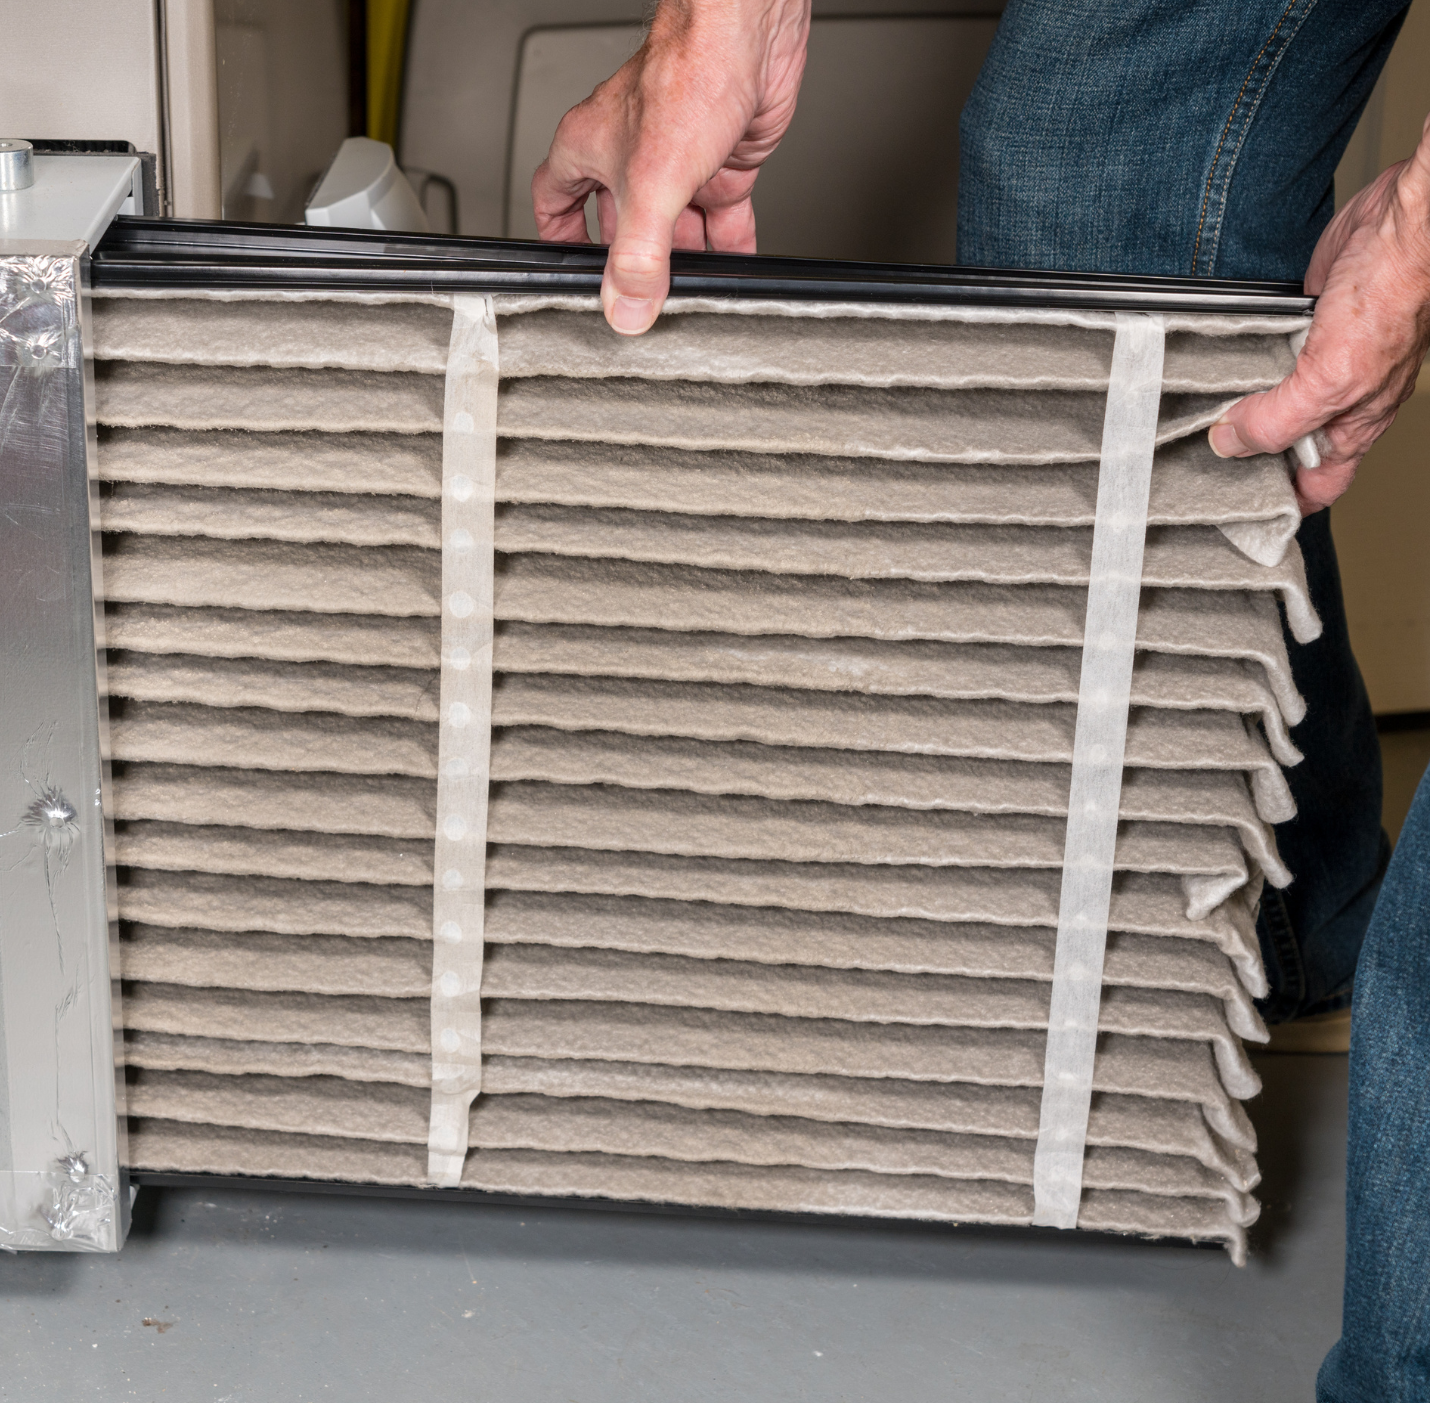 A person is holding a dirty air filter in their hands